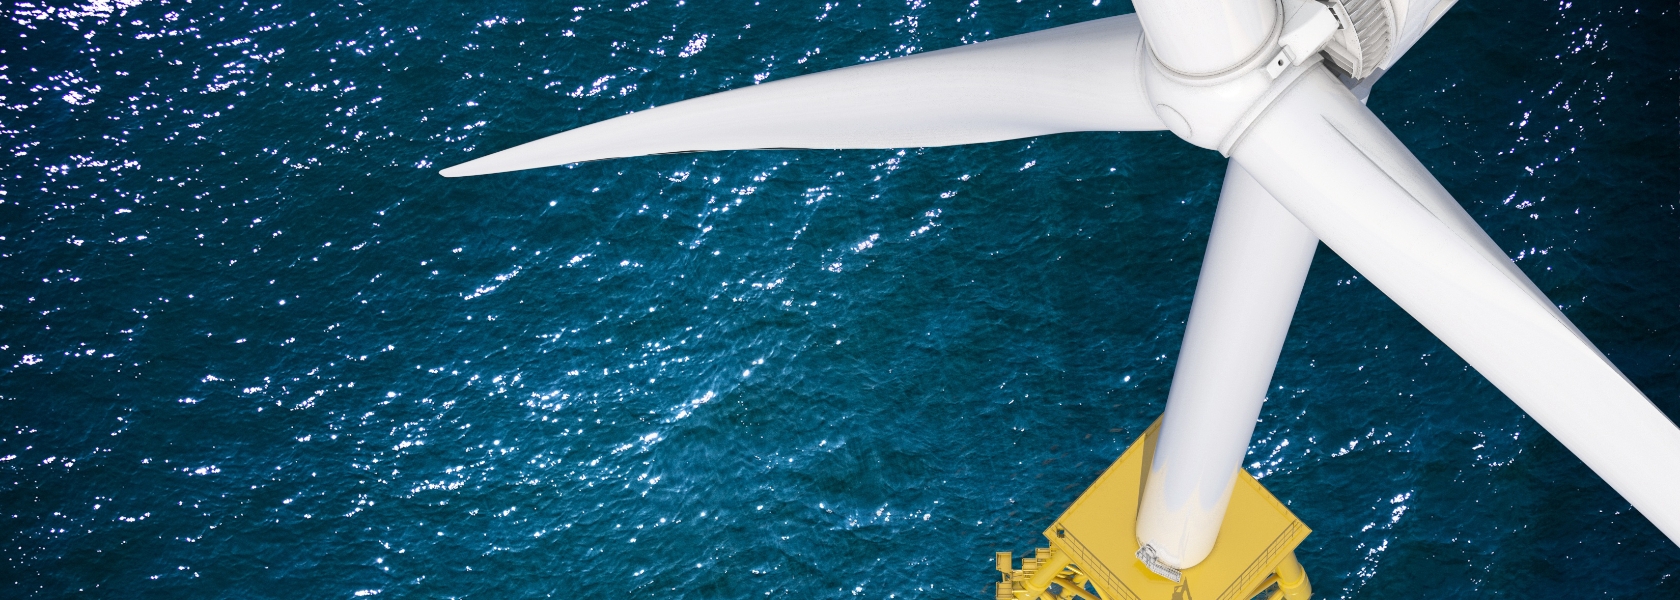 BRINGING THE MOST POWERFUL OFFSHORE WIND TURBINE TO THE UK